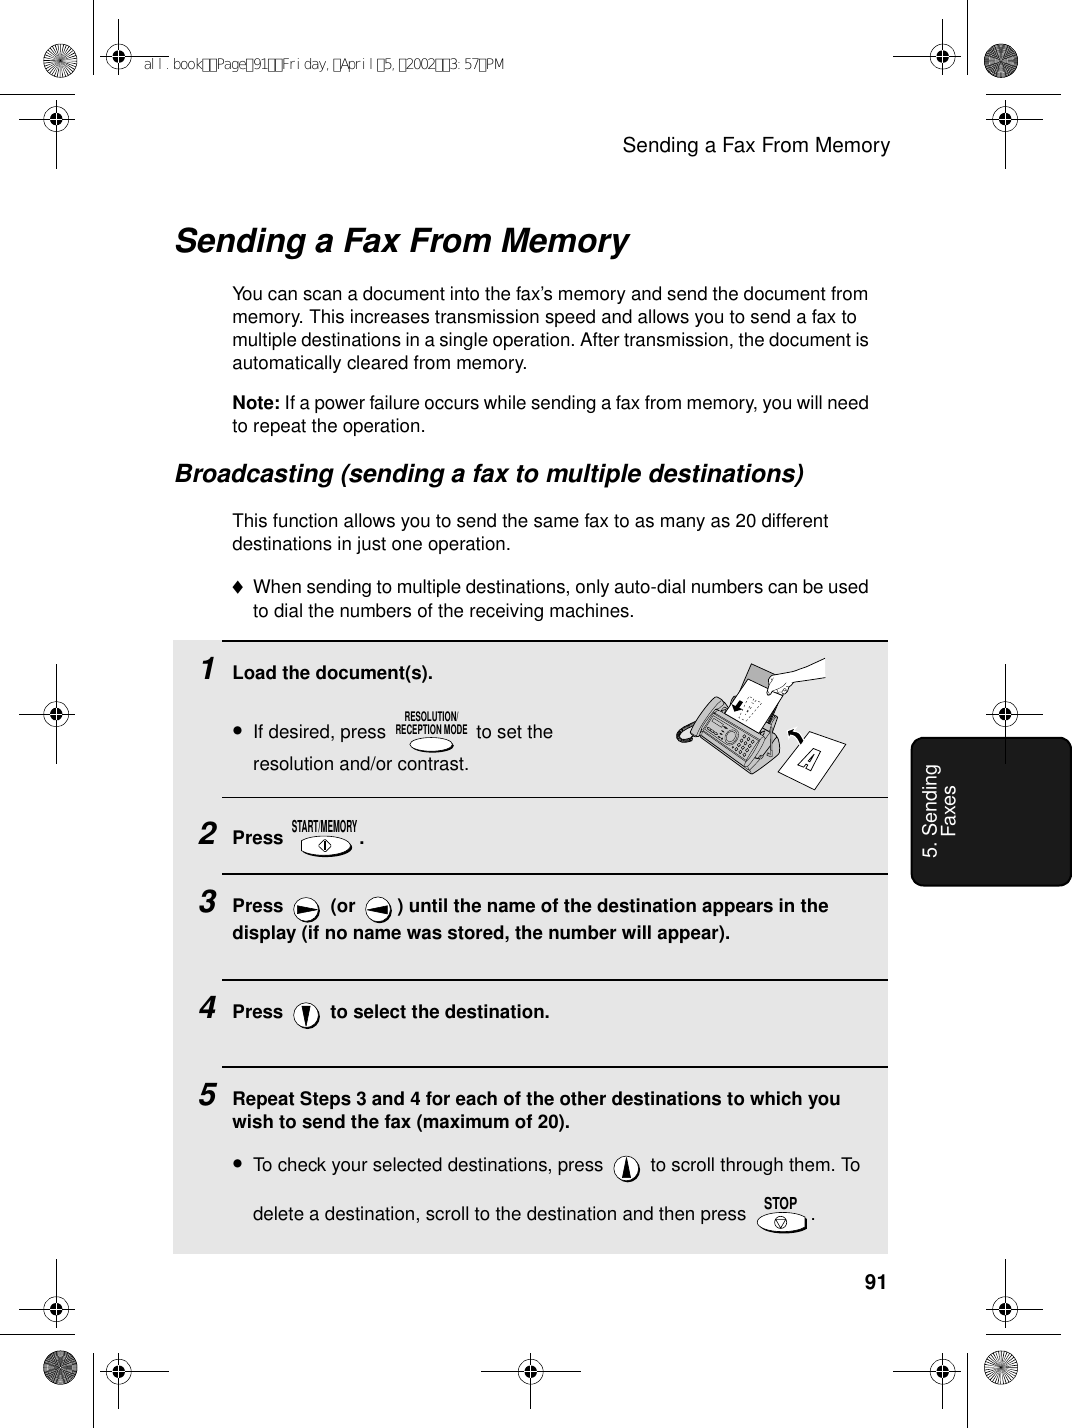 Sending a Fax From Memory915. Sending FaxesSending a Fax From MemoryYou can scan a document into the fax’s memory and send the document from memory. This increases transmission speed and allows you to send a fax to multiple destinations in a single operation. After transmission, the document is automatically cleared from memory.Note: If a power failure occurs while sending a fax from memory, you will need to repeat the operation.Broadcasting (sending a fax to multiple destinations)This function allows you to send the same fax to as many as 20 different destinations in just one operation. ♦When sending to multiple destinations, only auto-dial numbers can be used to dial the numbers of the receiving machines.1Load the document(s).•If desired, press   to set the resolution and/or contrast.2Press .3Press   (or  ) until the name of the destination appears in the display (if no name was stored, the number will appear).4Press   to select the destination.5Repeat Steps 3 and 4 for each of the other destinations to which you wish to send the fax (maximum of 20).•To check your selected destinations, press   to scroll through them. To delete a destination, scroll to the destination and then press  .  RESOLUTION/RECEPTION MODESTART/MEMORYSTOPall.bookPage91Friday,April5,20023:57PM